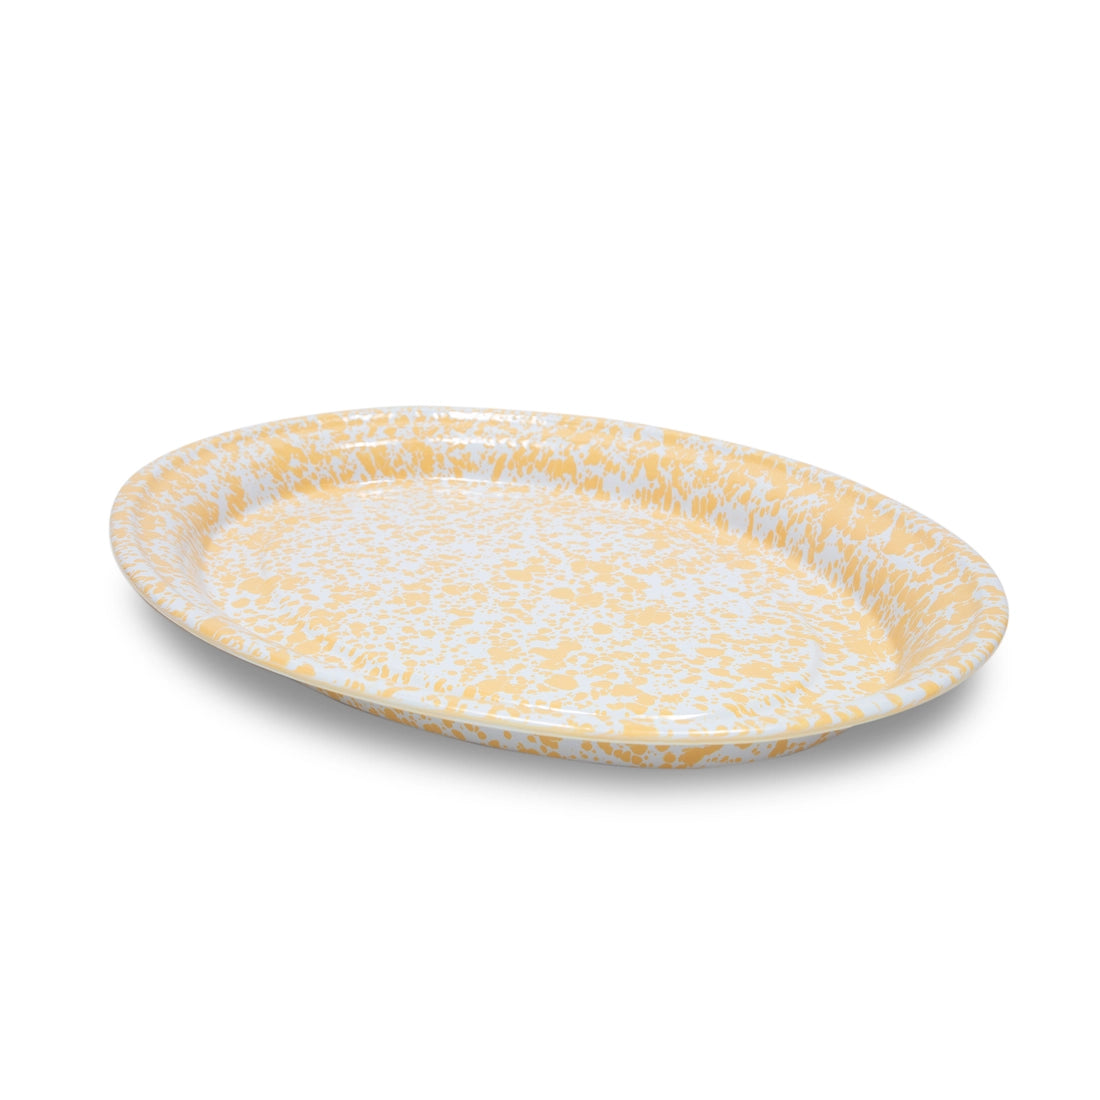 Large Oval Platter - Buttercup